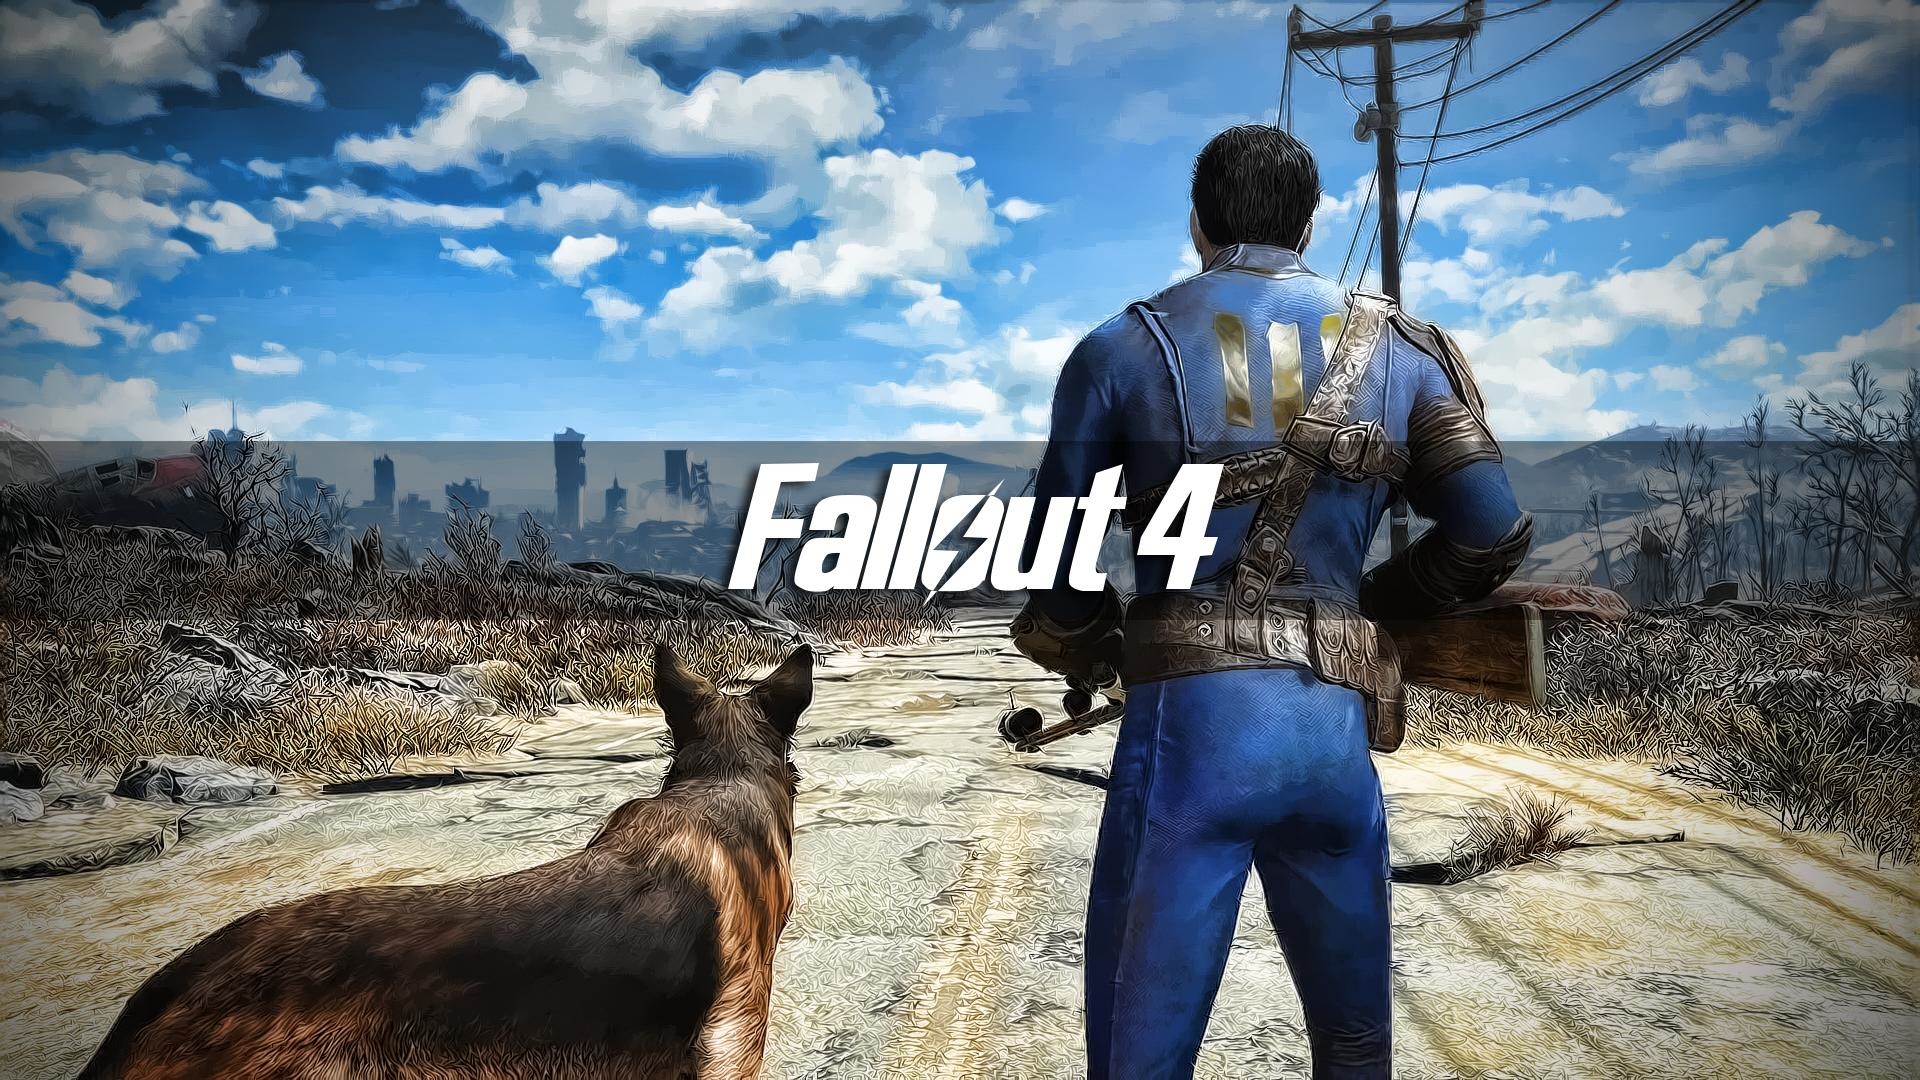 1920x1080 Fallout 4 background